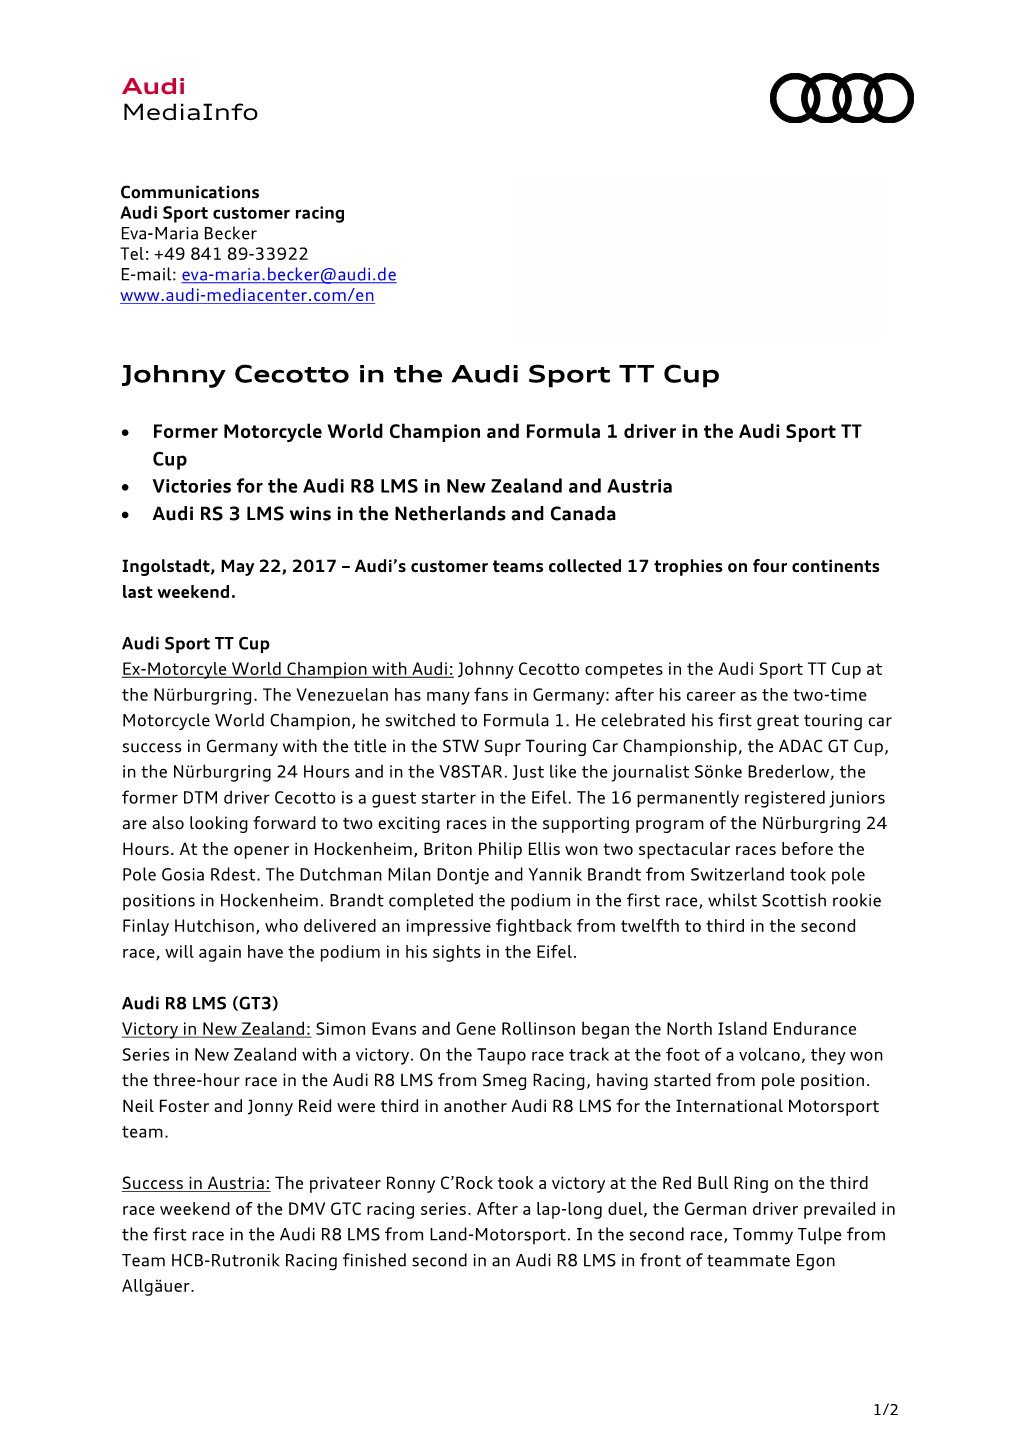 Johnny Cecotto in the Audi Sport TT Cup